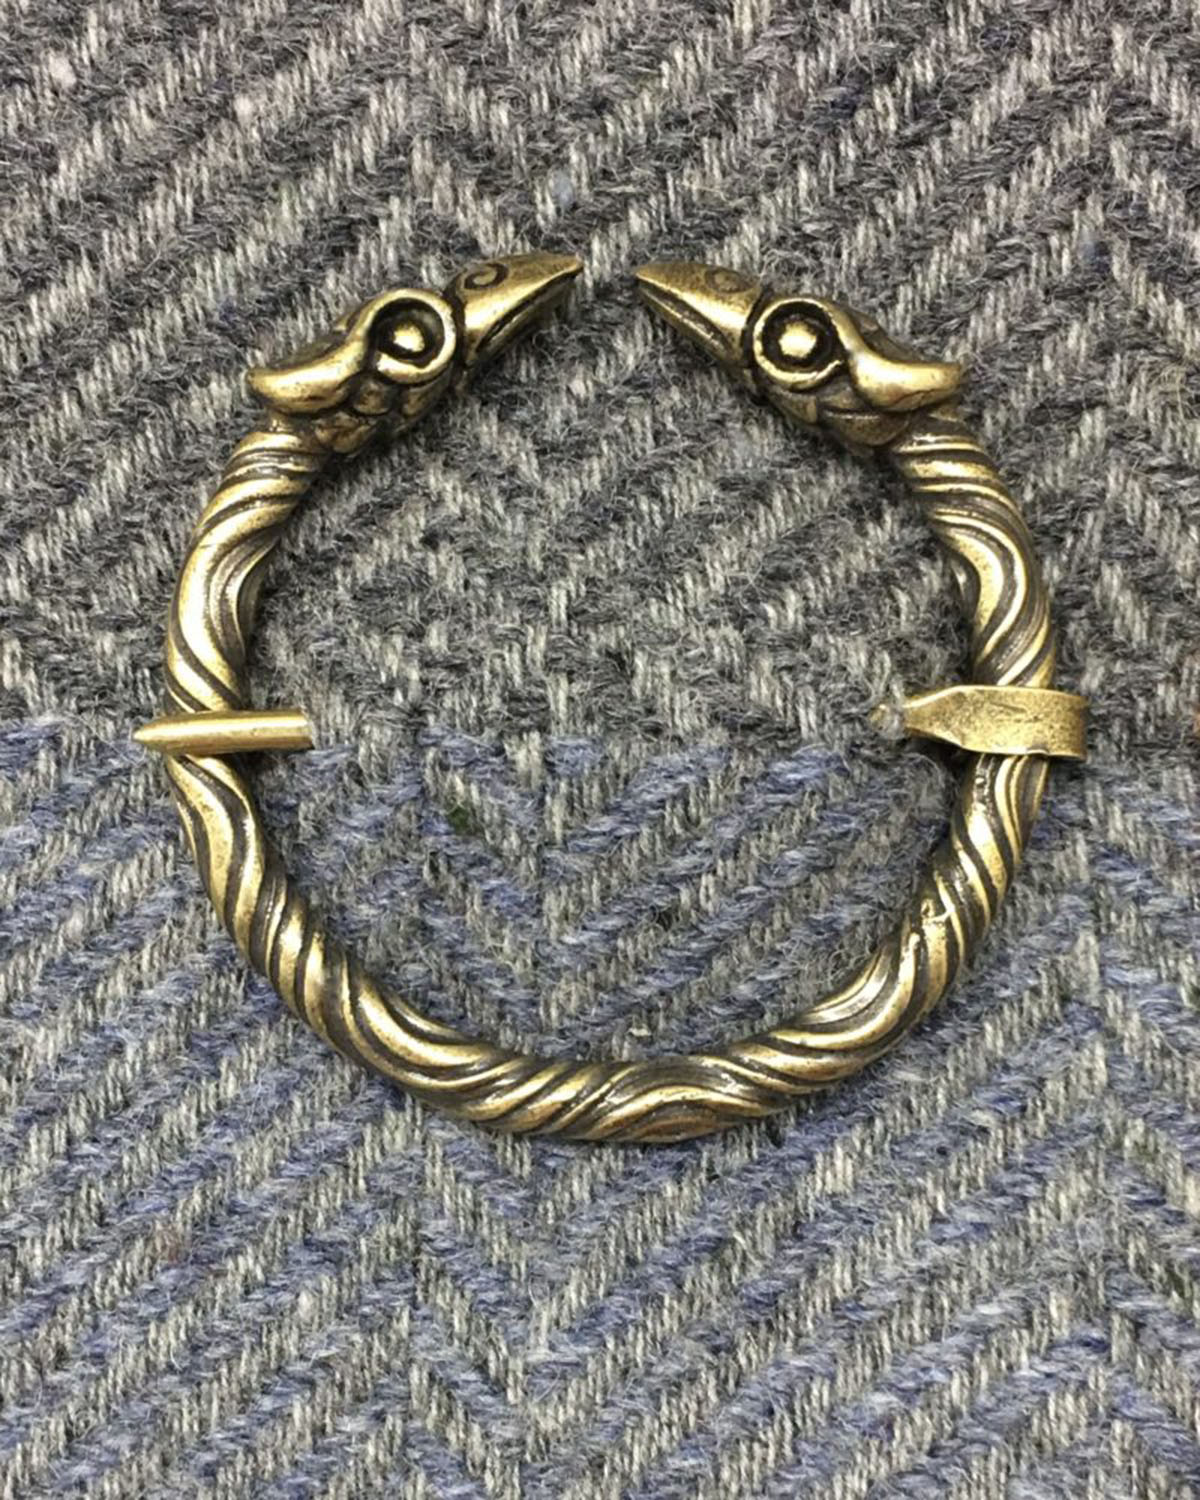 A brass Raven Penannular Brooch with a pair of eagles and a raven on it.